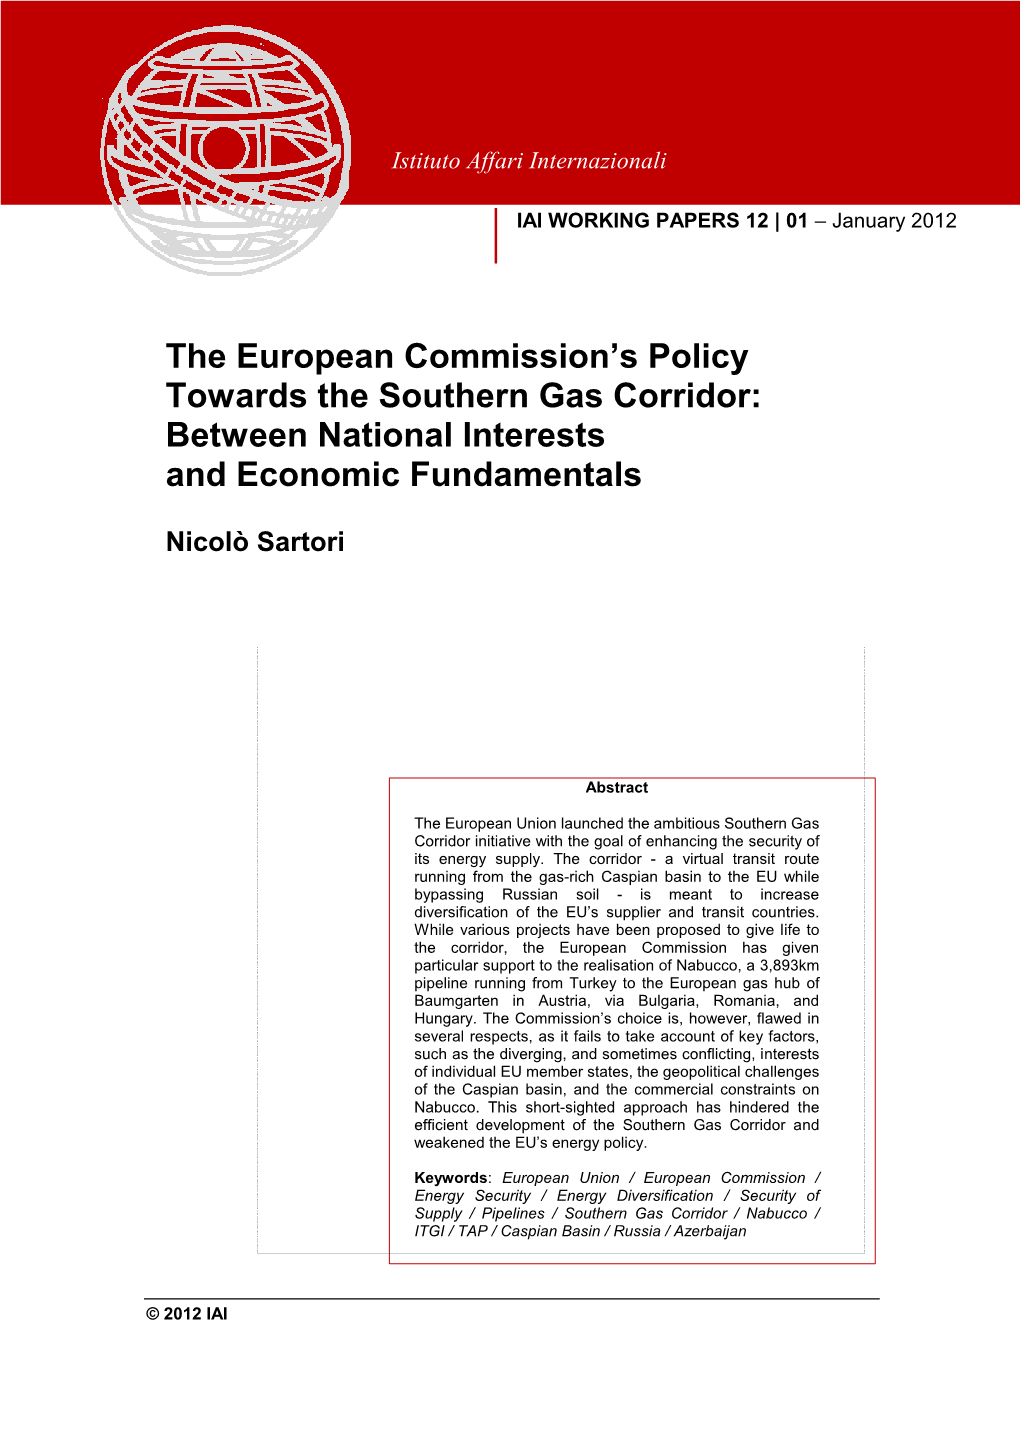 The European Commission's Policy Towards the Southern Gas Corridor